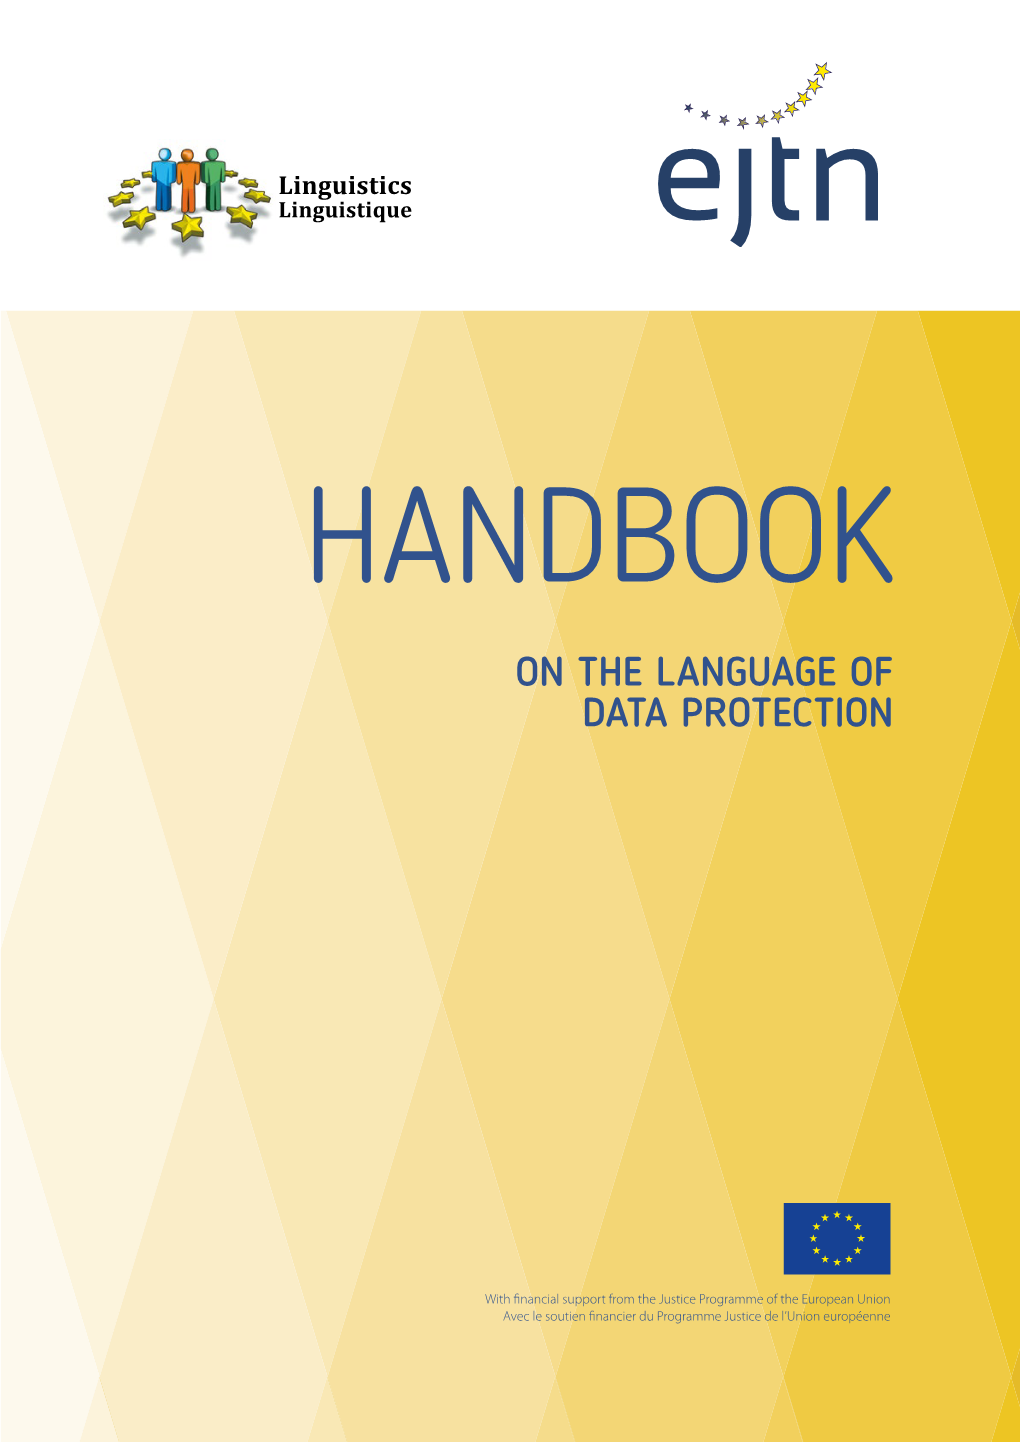 On the Language of Data Protection on the Language of Data Protection Data of Language the on Handbook Handbook